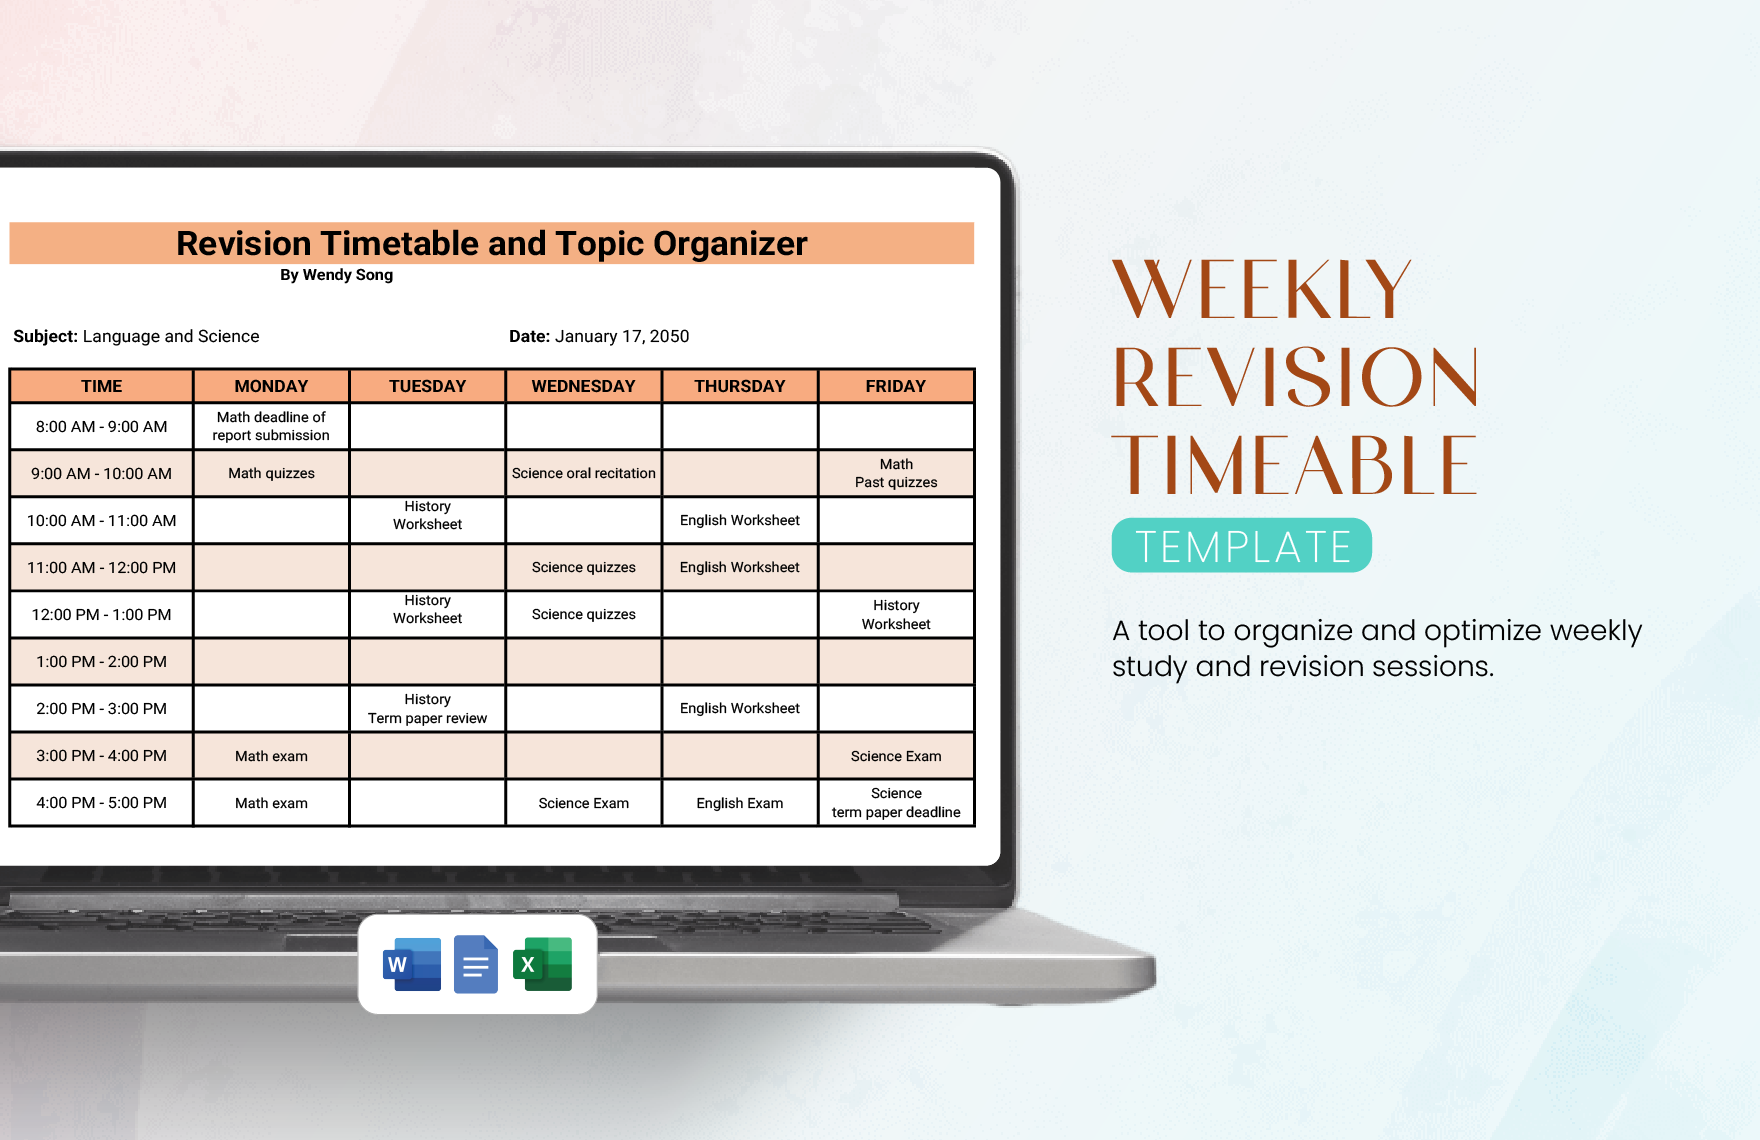 Weekly Revision Timetable Planner Template in Word, Google Docs, Excel